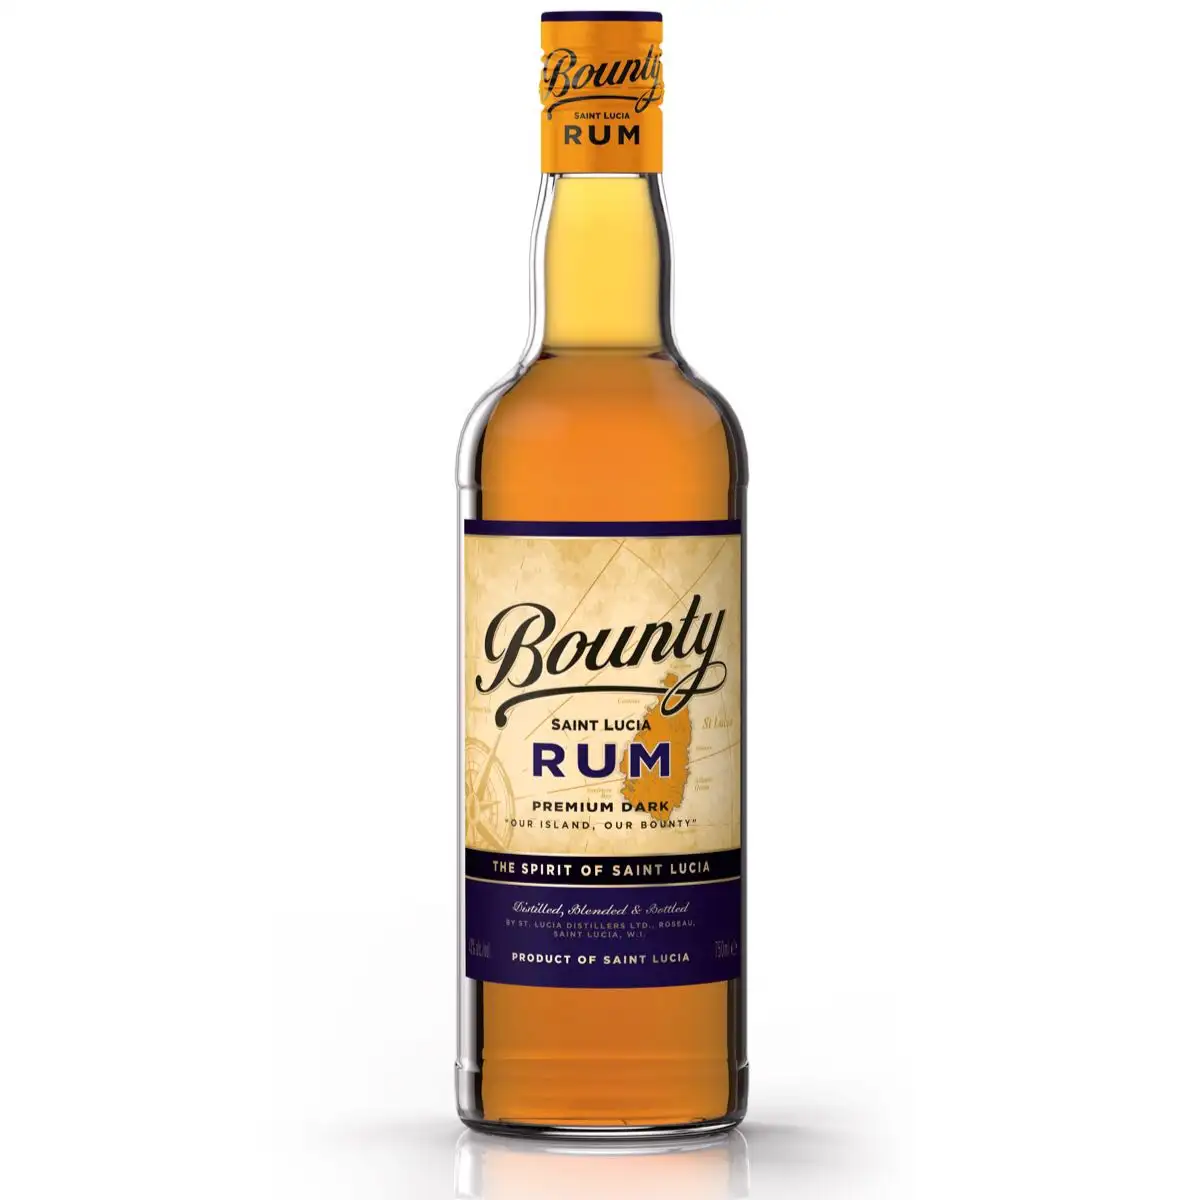 Image of the front of the bottle of the rum Bounty Premium Dark